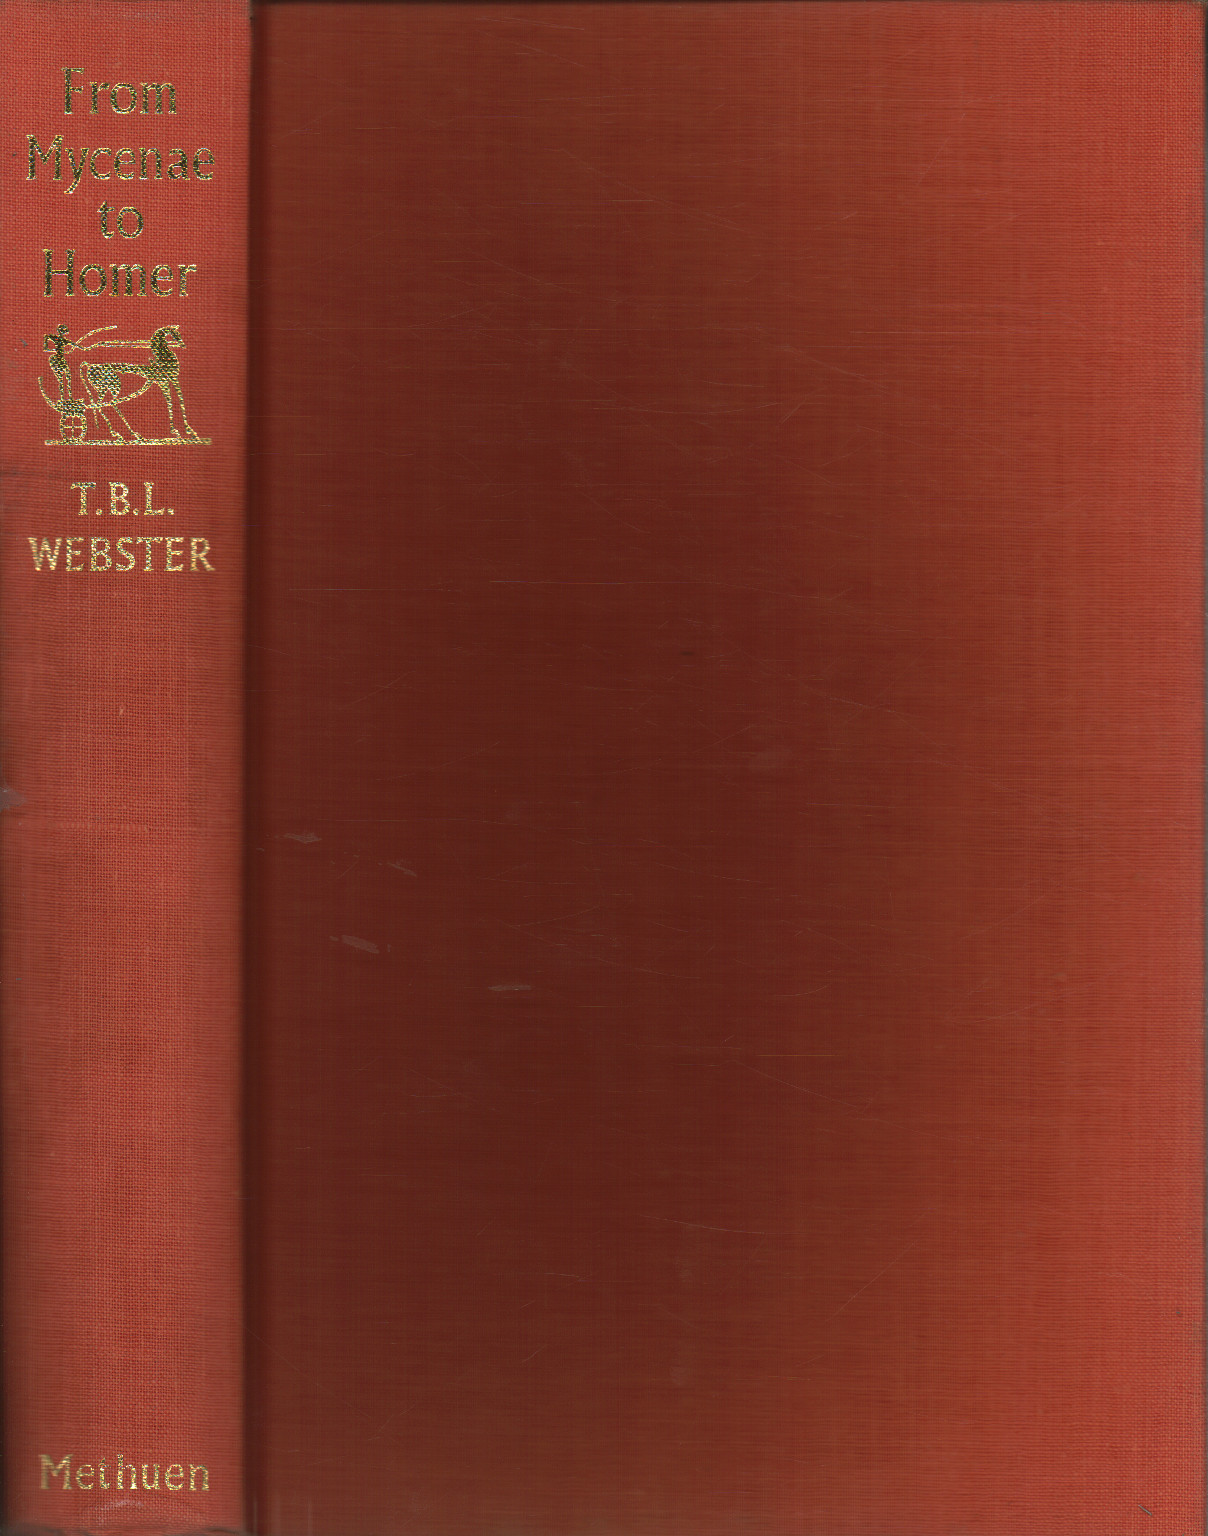 From Mycenae to Homer, T.B.L.Webster